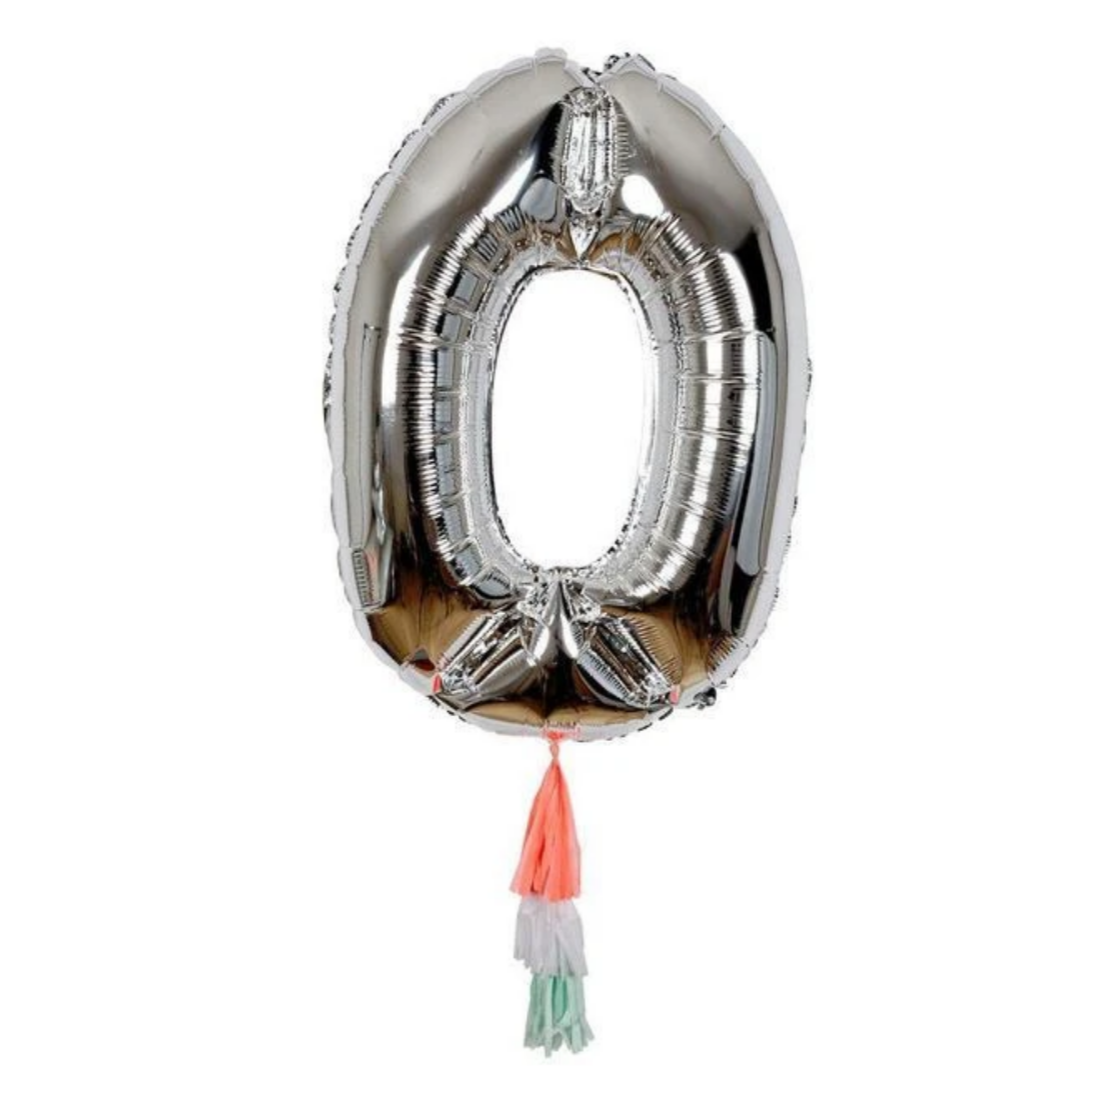 silver balloon in a 0 shape with colorful tassel at bottom